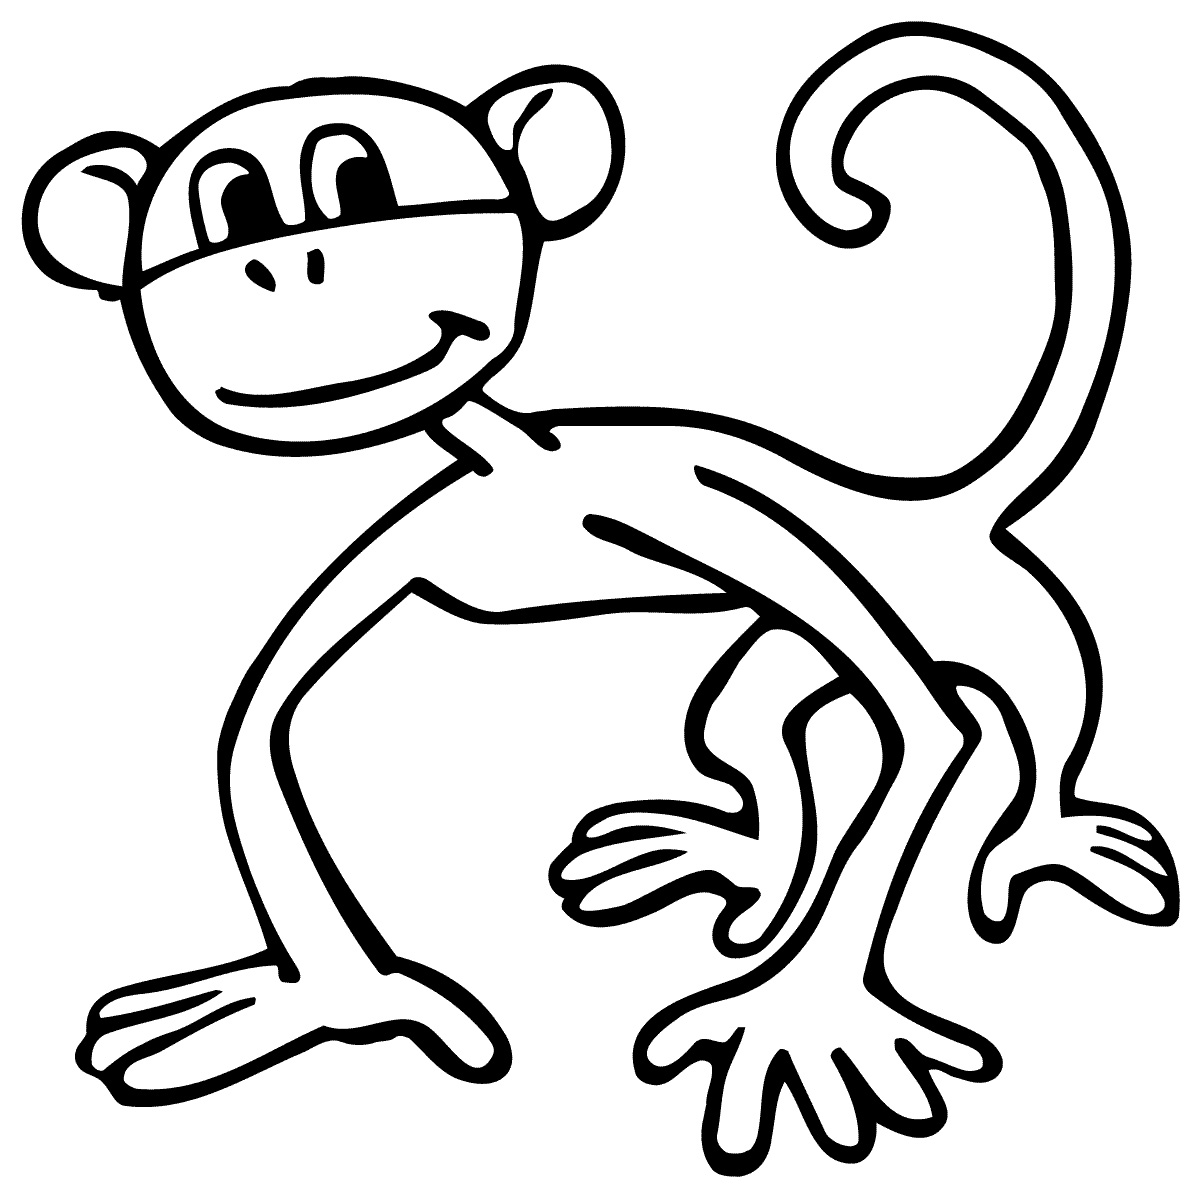 pictures of monkeys to color coloring pages of cute baby monkeys at getcoloringscom to monkeys of pictures color